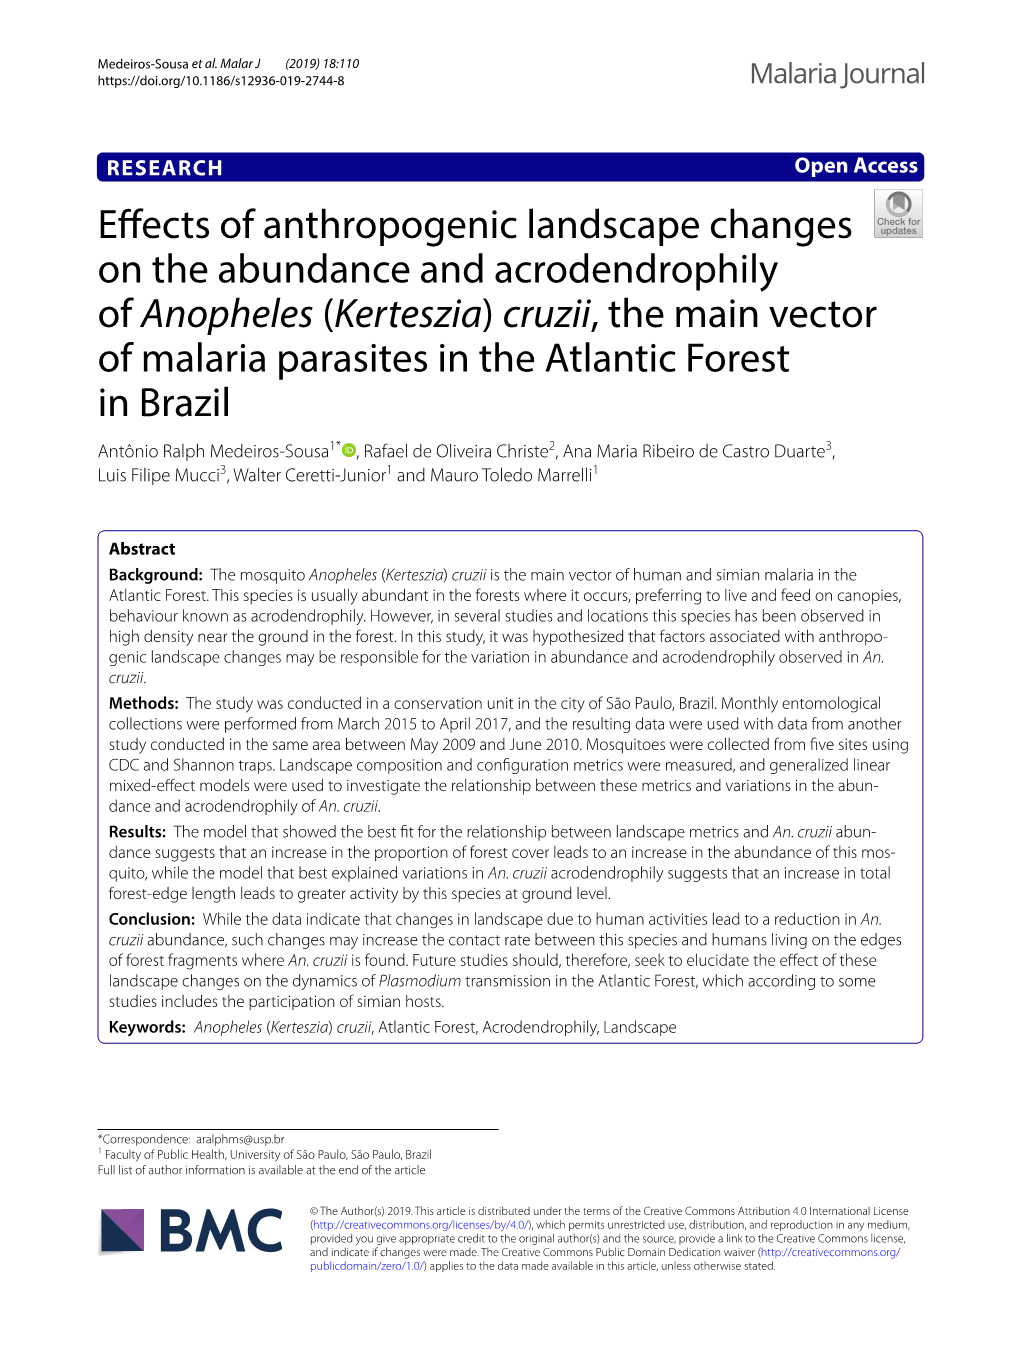 Effects of Anthropogenic Landscape Changes on the Abundance and Acrodendrophily of Anopheles (Kerteszia) Cruzii, the Main Vector